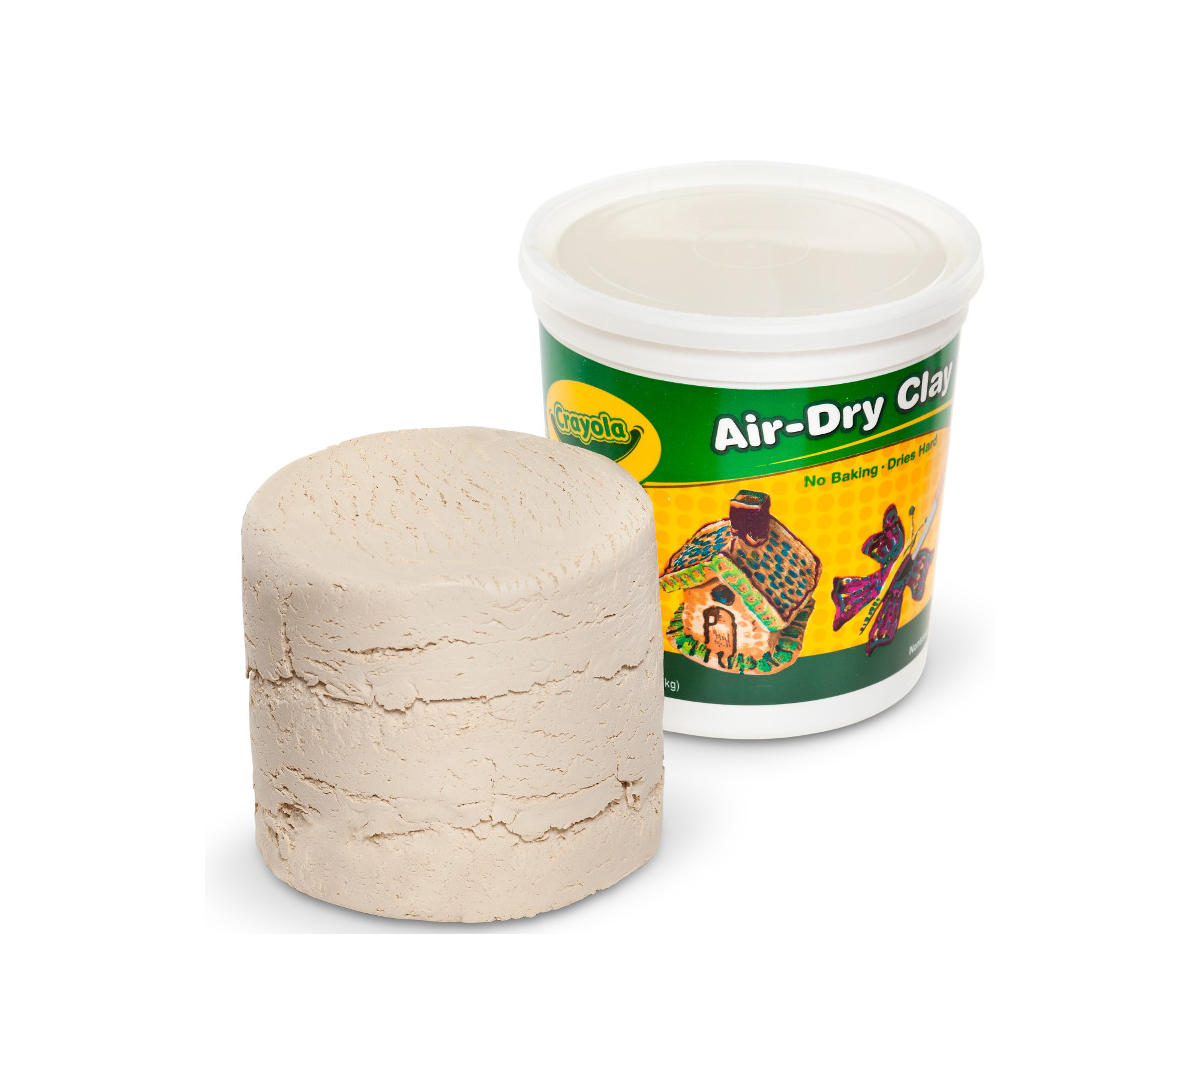 CRAYOLA AIR-DRY NATURAL EARTH CLAY 5 POUND TUB WHITE FOR AGES 4 TO 18 YEARS 